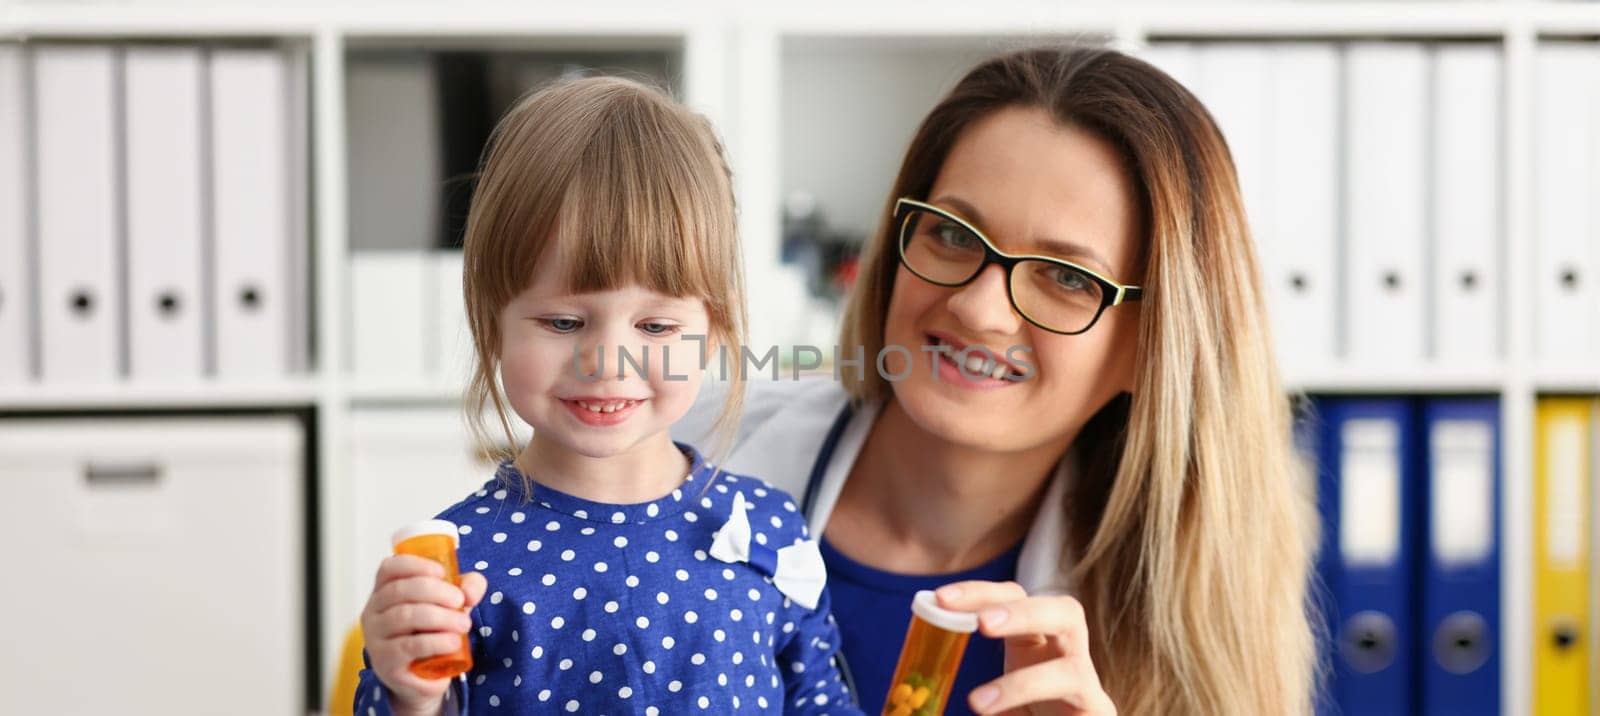 Beautiful smiling female doctor hold in arms pill bottle and offer it to child visitor closeup. Panacea or life save baby from legal store prescribe vitamin medic aid for healthy lifestyle